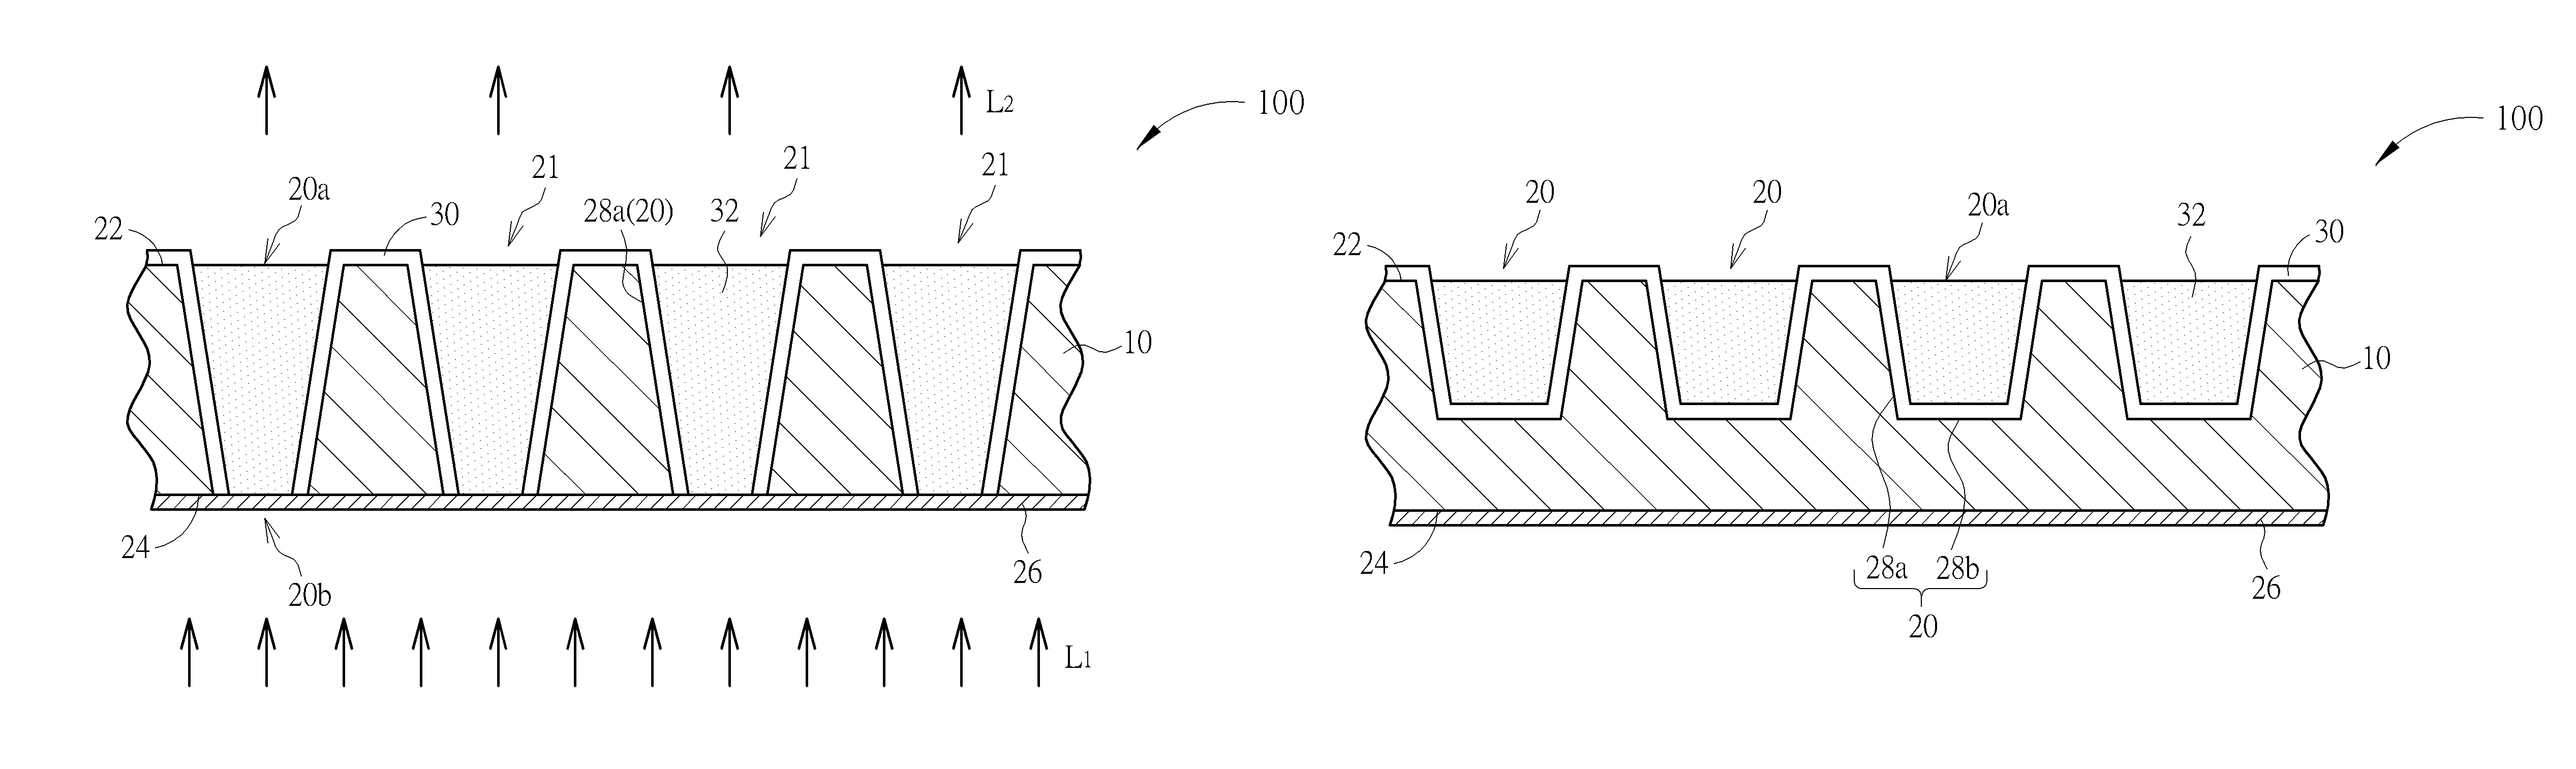 Conversion structure, image sensor assembly and method for fabricating conversion structure